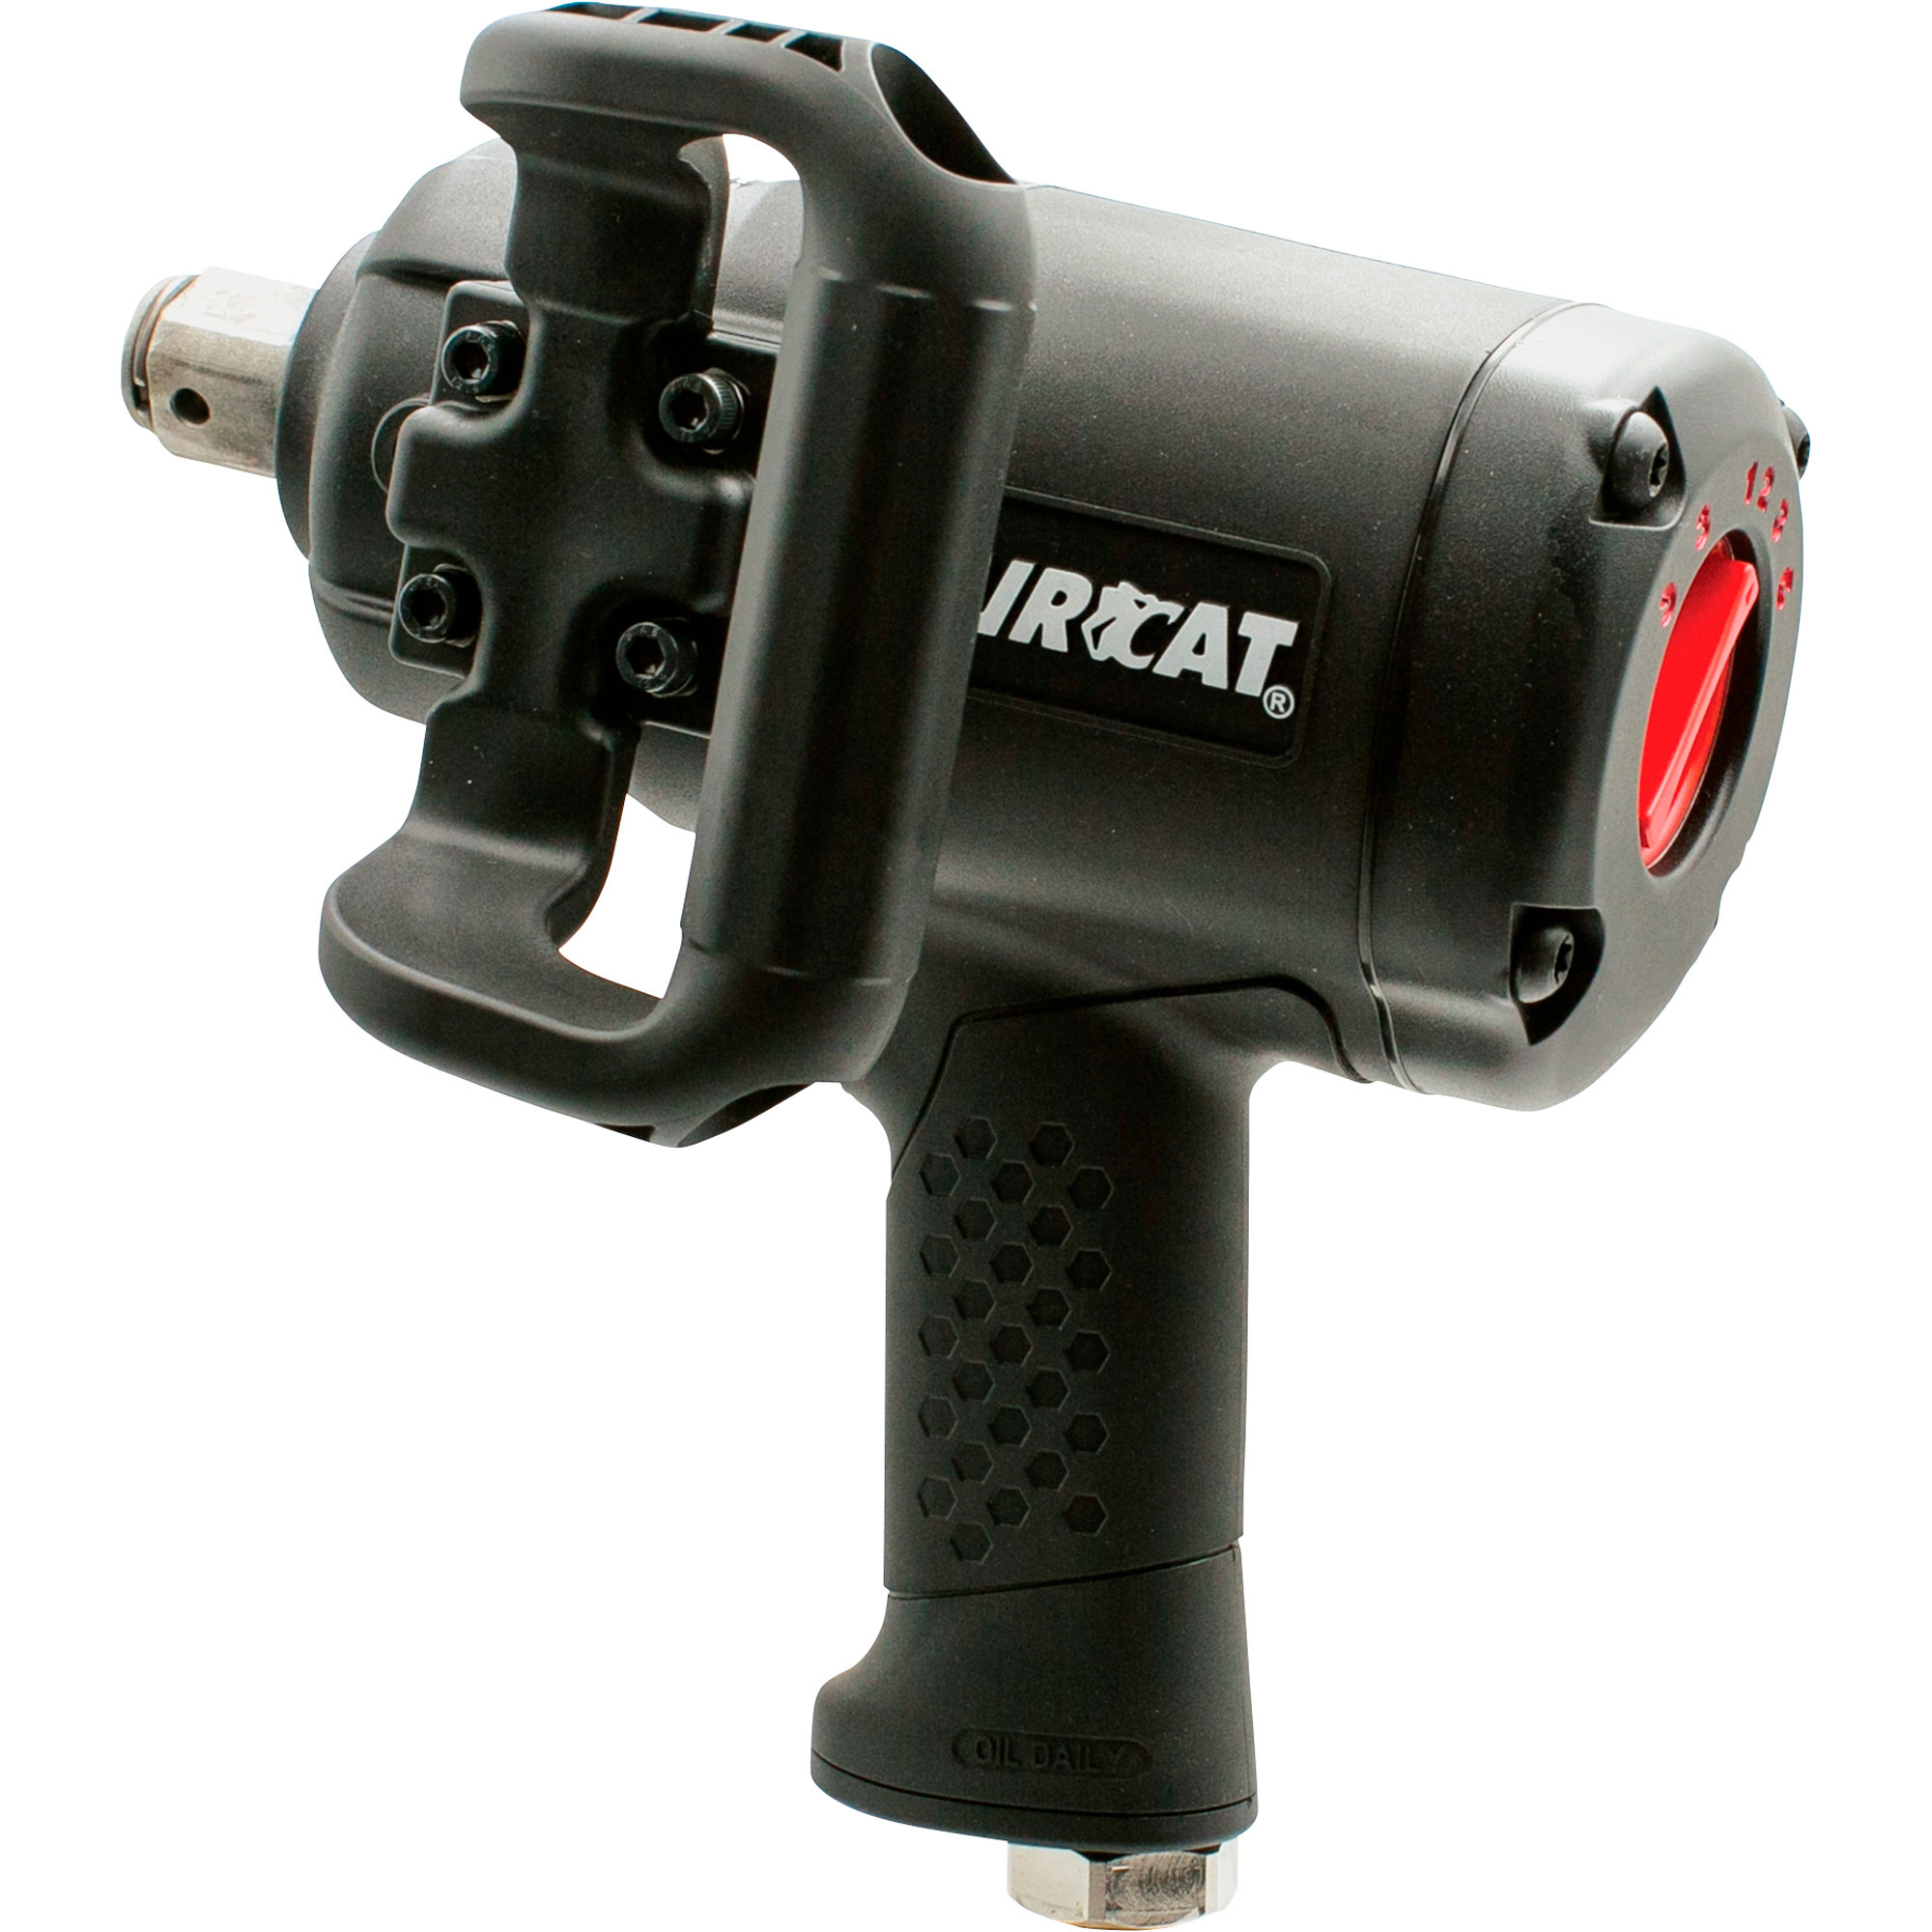 AIRCAT 1Inch Low-Weight Air Impact Wrench, 1Inch Drive, 2100ft./lbs. Torque, Model 1870-P